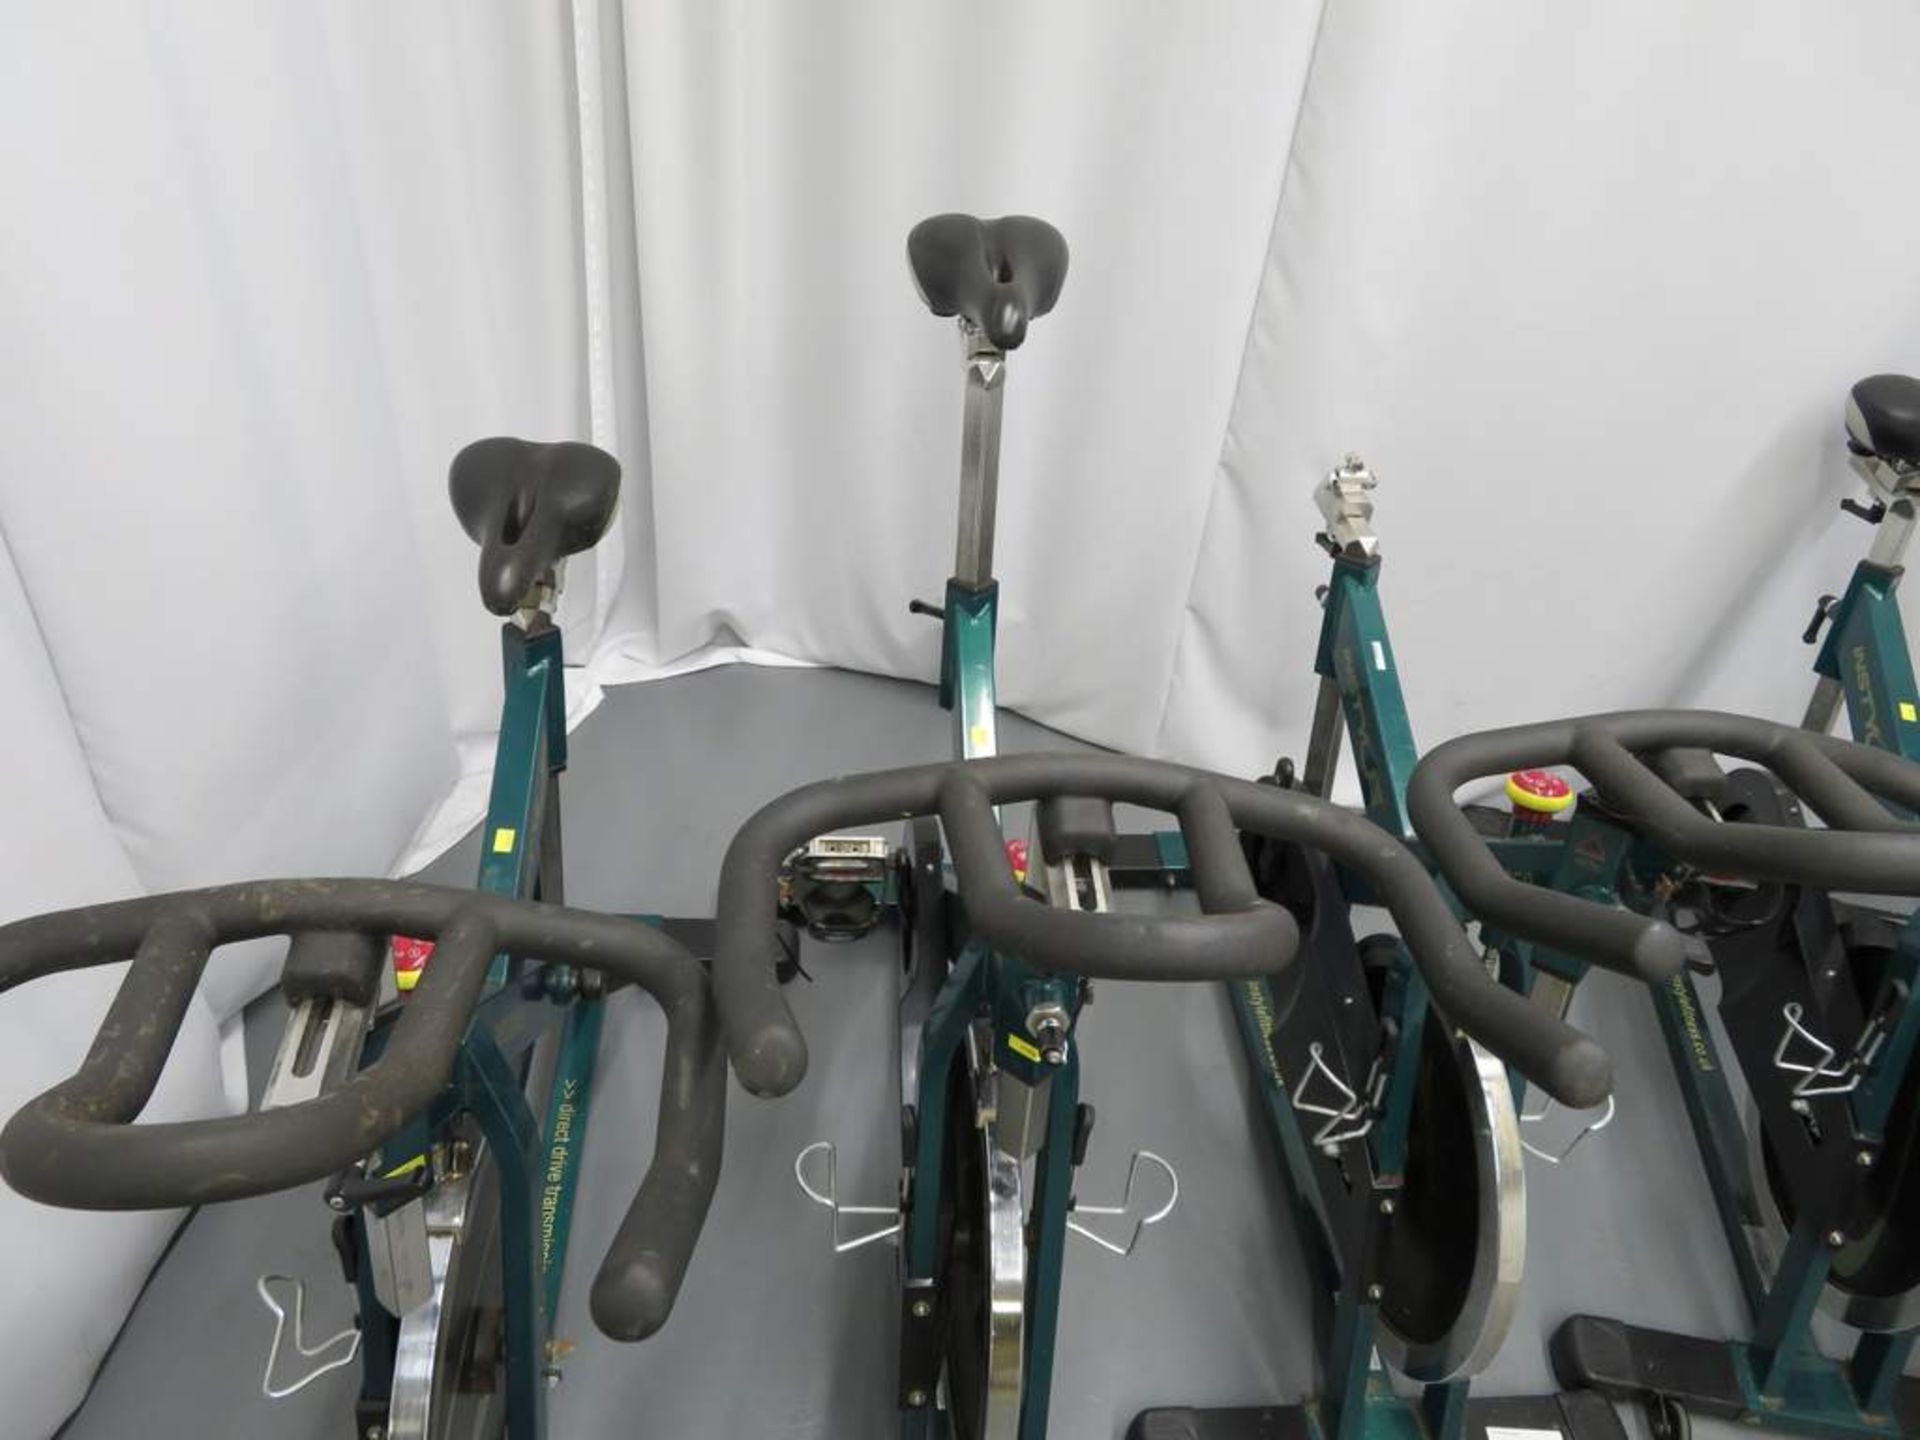 6x InStyle V850 Spin Bike - 1 Missing A Seat. - Image 4 of 9